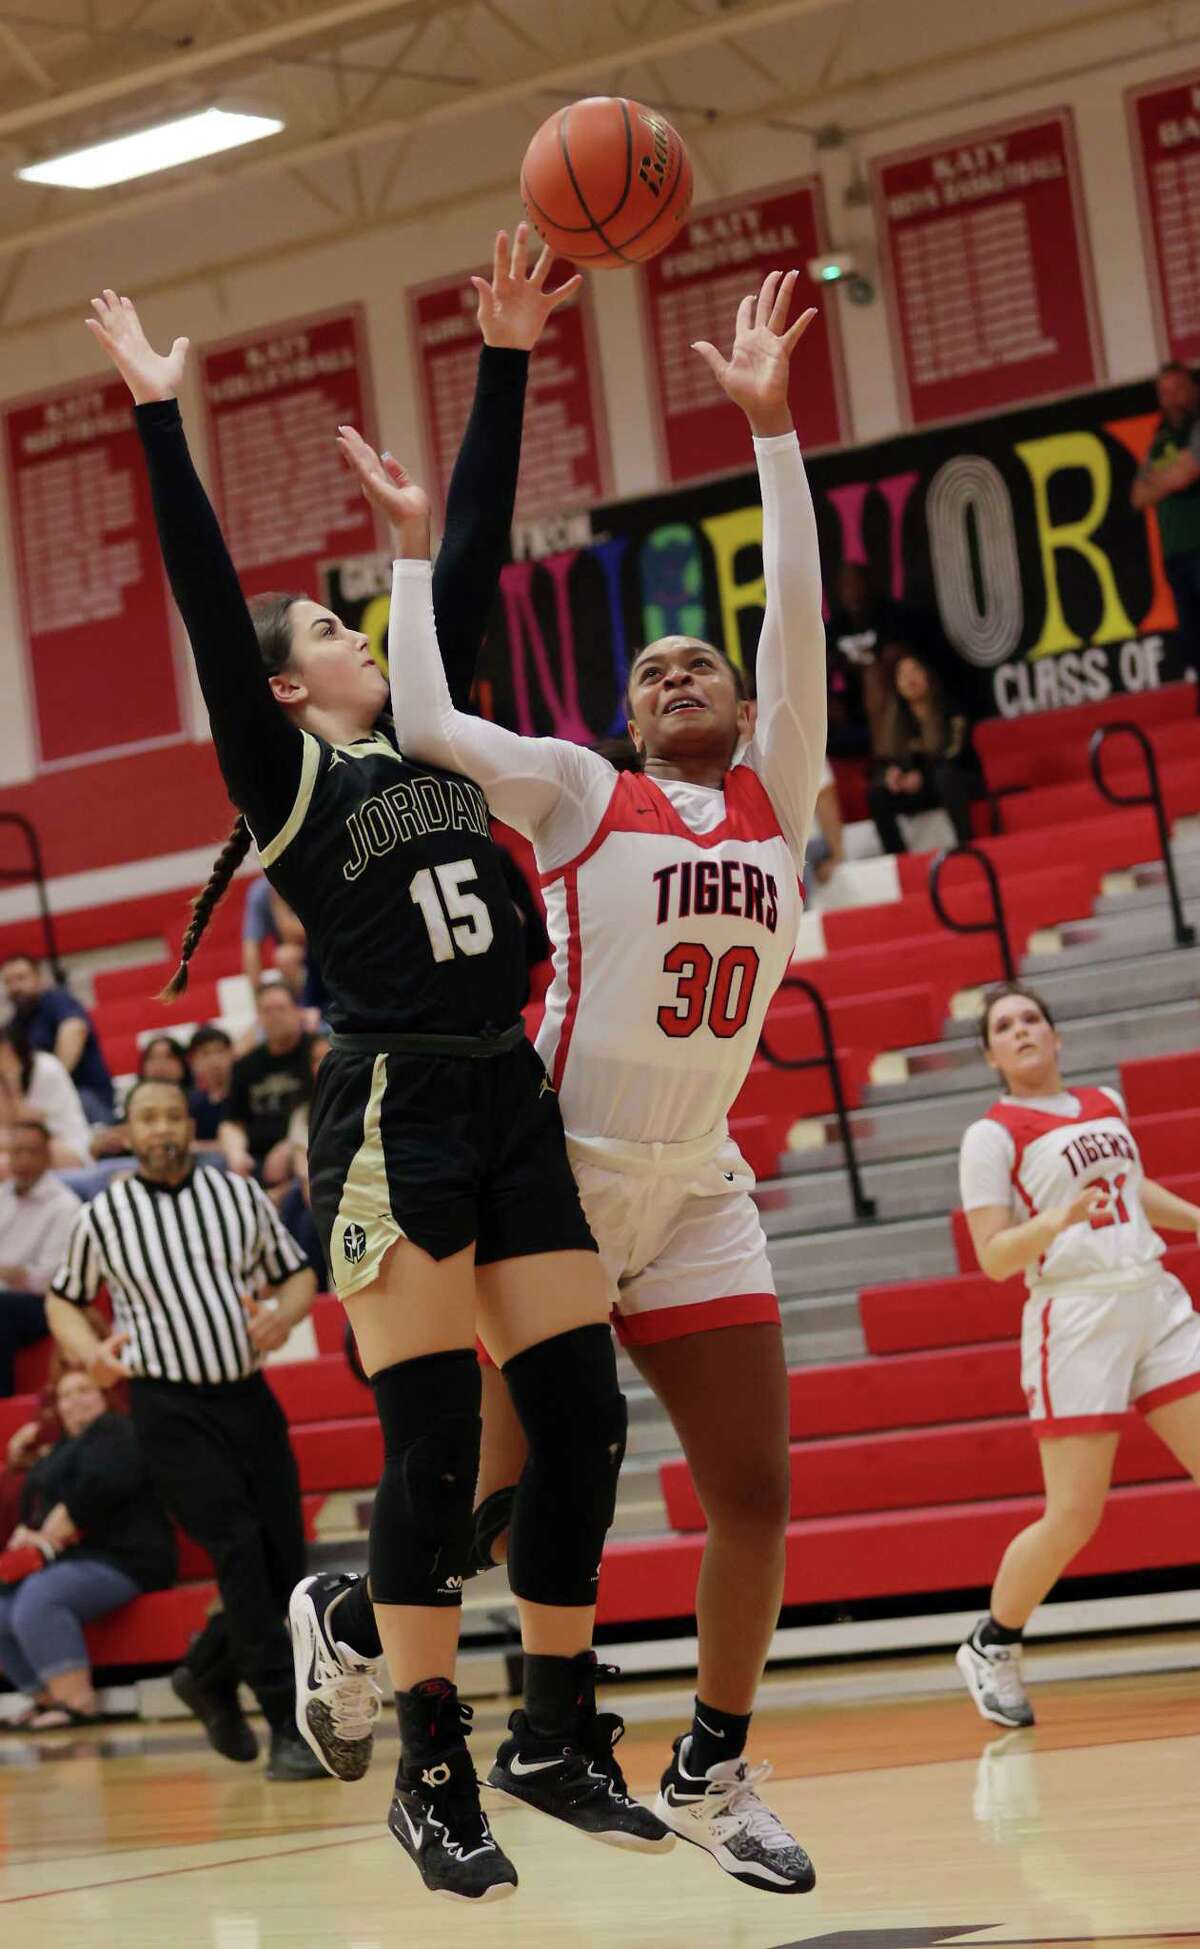 KATY, TX -DECEMBER 9: Katy Tigers Lyric Barr (30) drives to the basket on Jordan Warriors Allie Hakinzadeh (15) during a District 19-6A girls basketball game between Jordan and Katy December 9, 2022 in Katy,Texas.